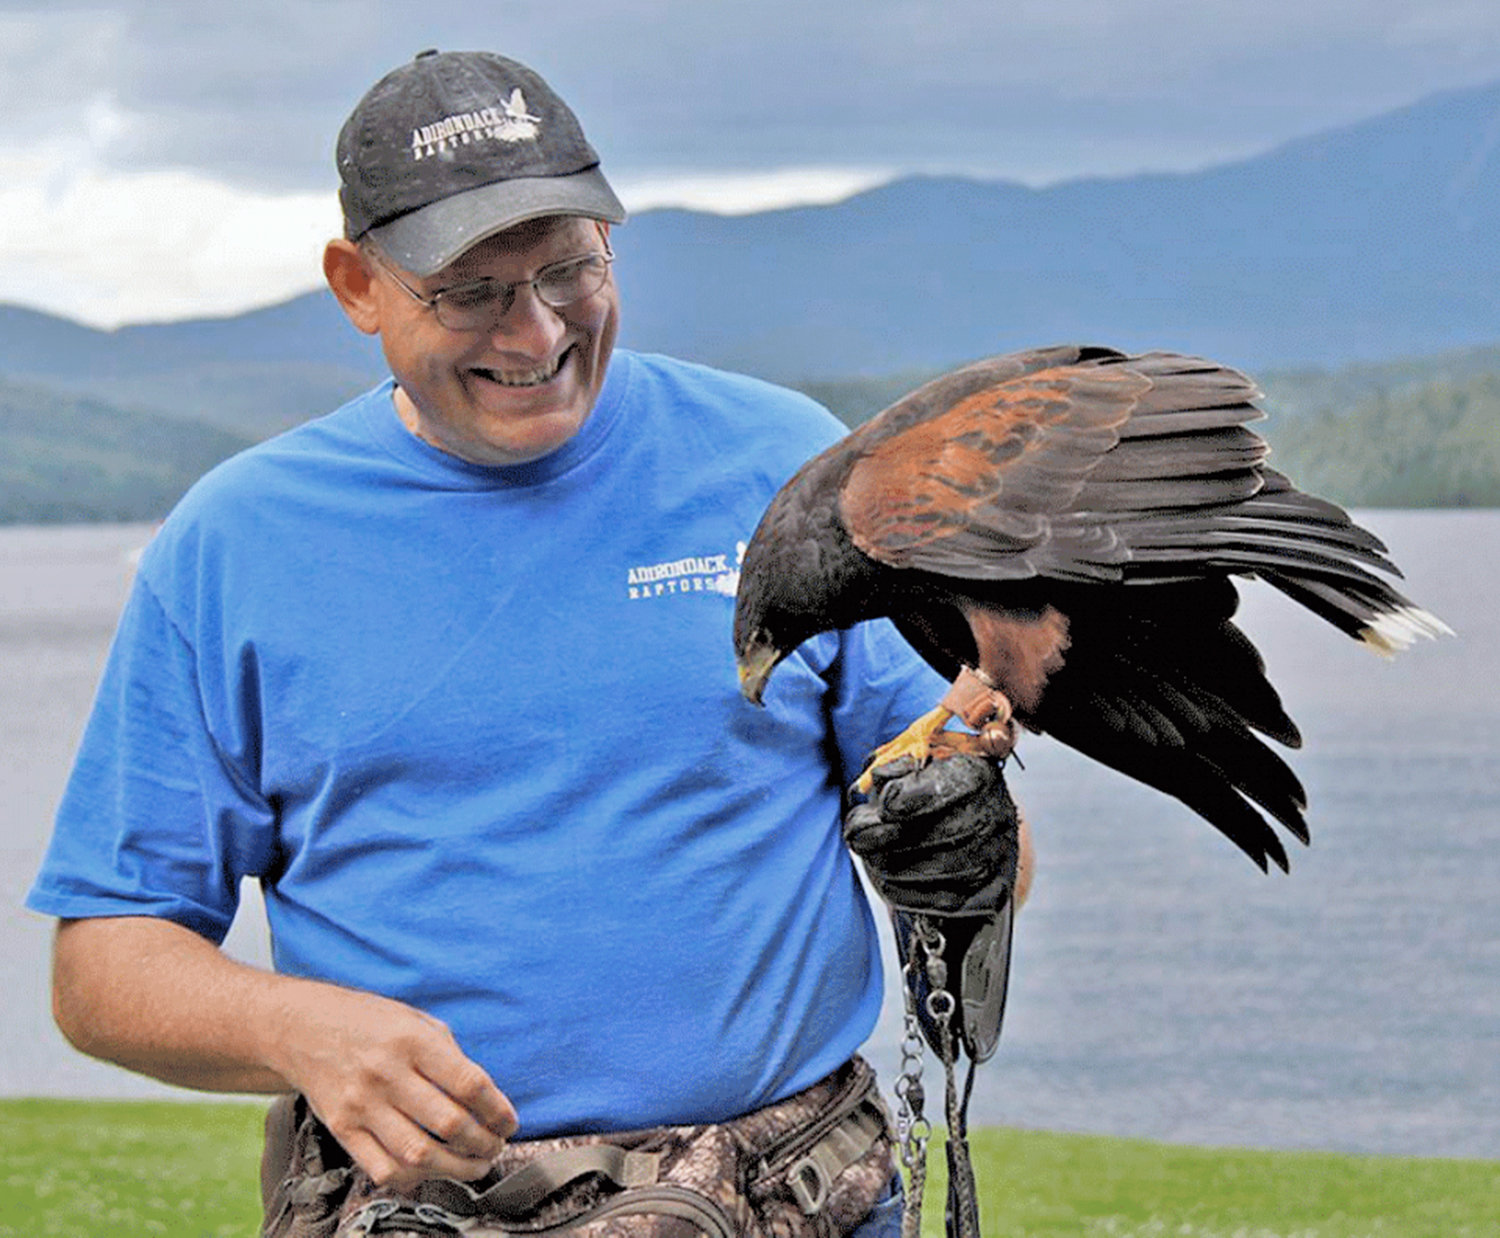 SOARING IN FOR A LESSON — Visitors to the Great Swamp Conservancy’s Spring Migration Festival can meet Mark Manske from 1 to 3 p.m. on Sunday, May 1. Manske, owner of Adirondack Raptors, will rare opportunity for festival goers to get up close and personal with birds of prey.